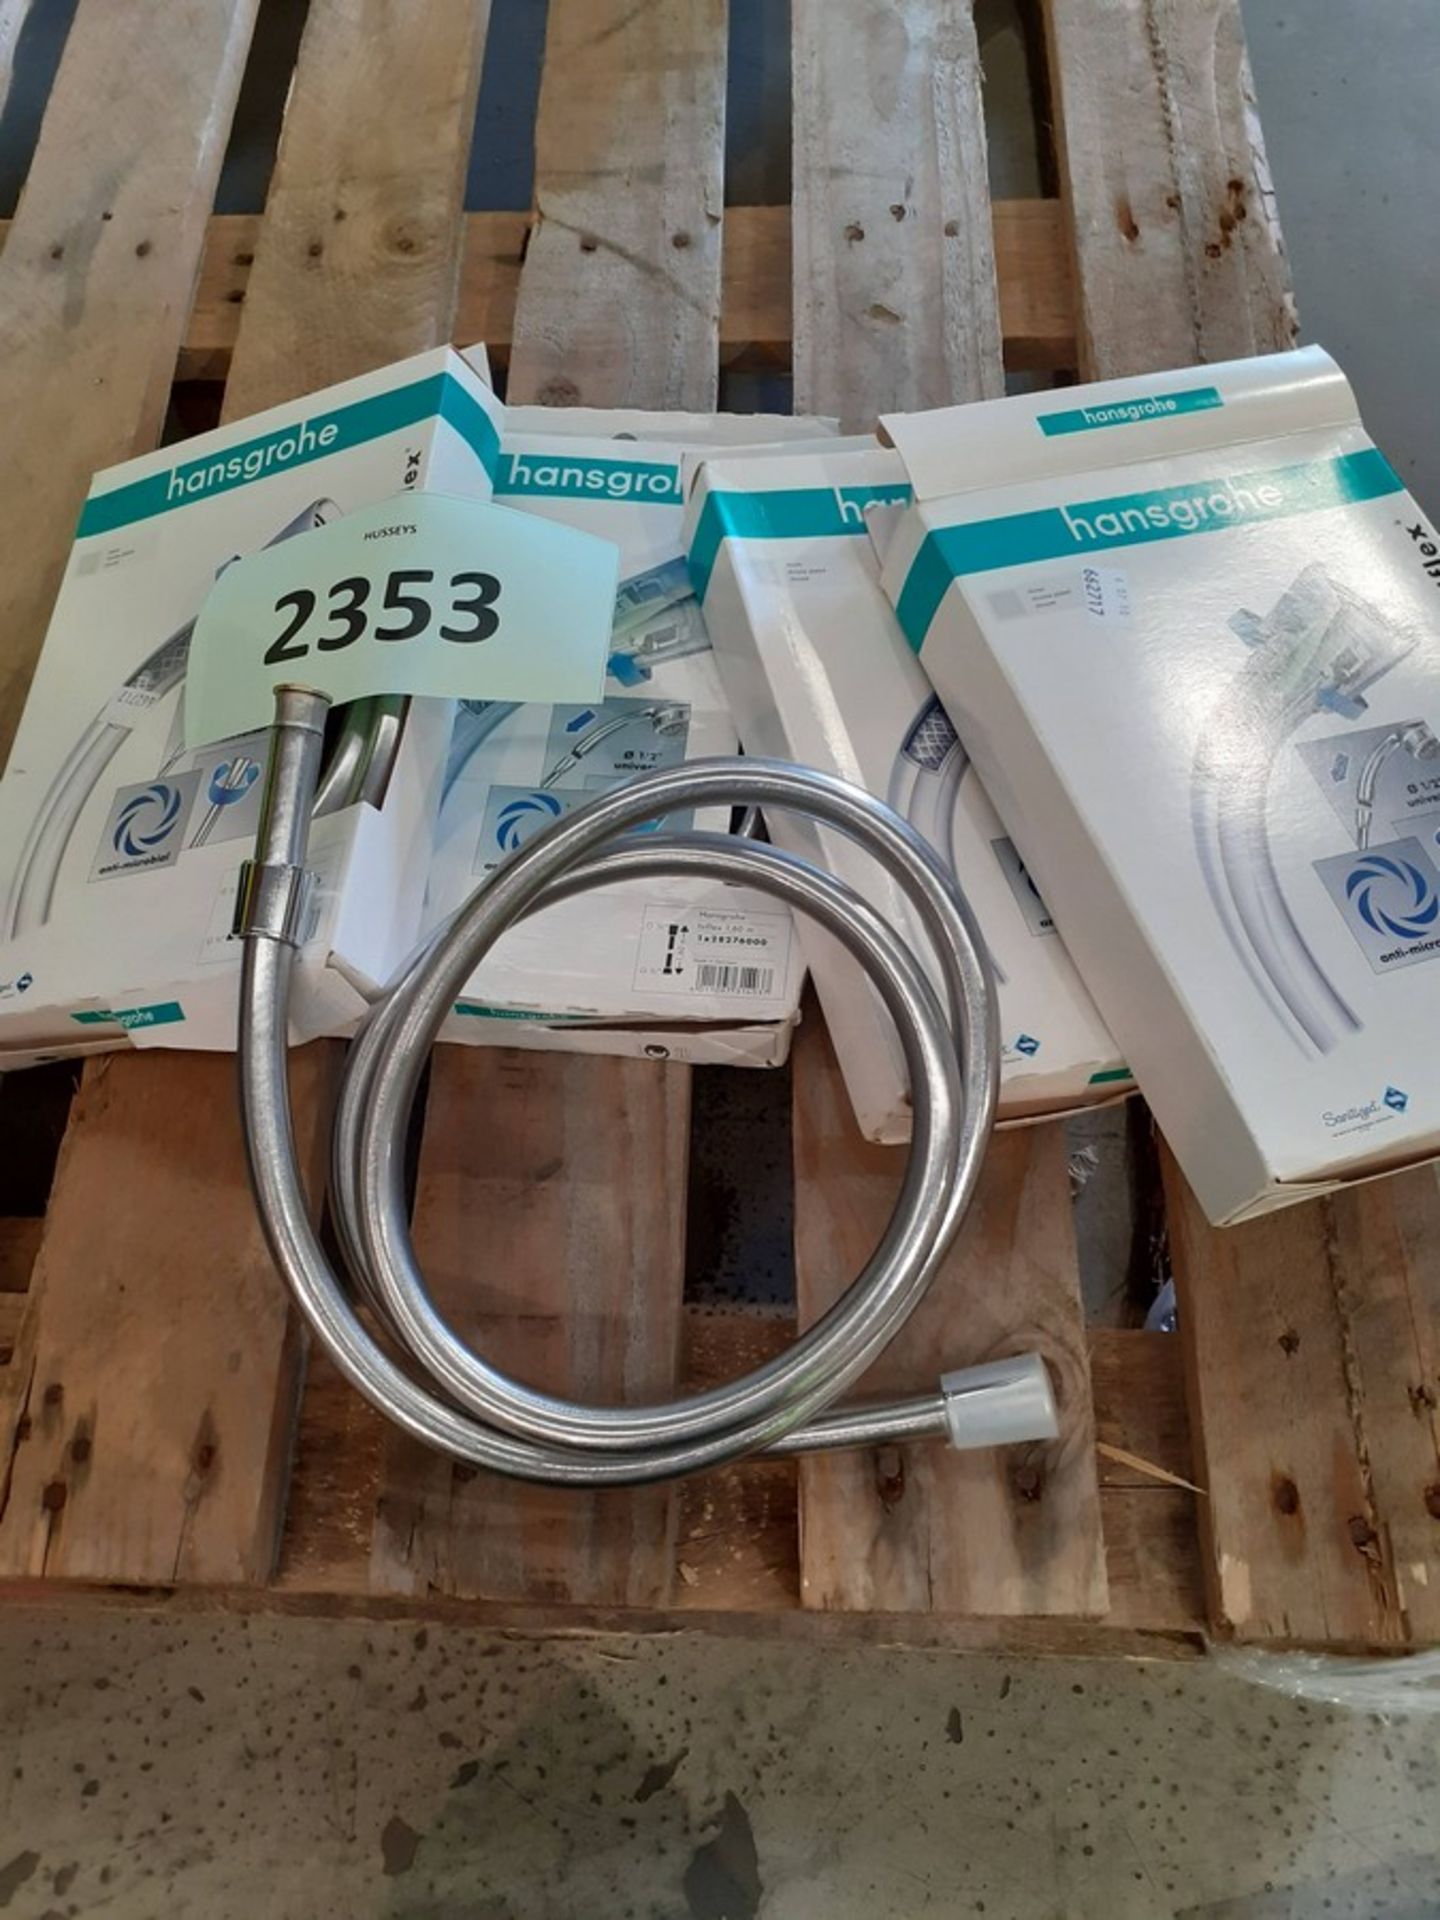 Hansgrohe isiflex chrome plated shower hose 1.6M - 28276-000 x4